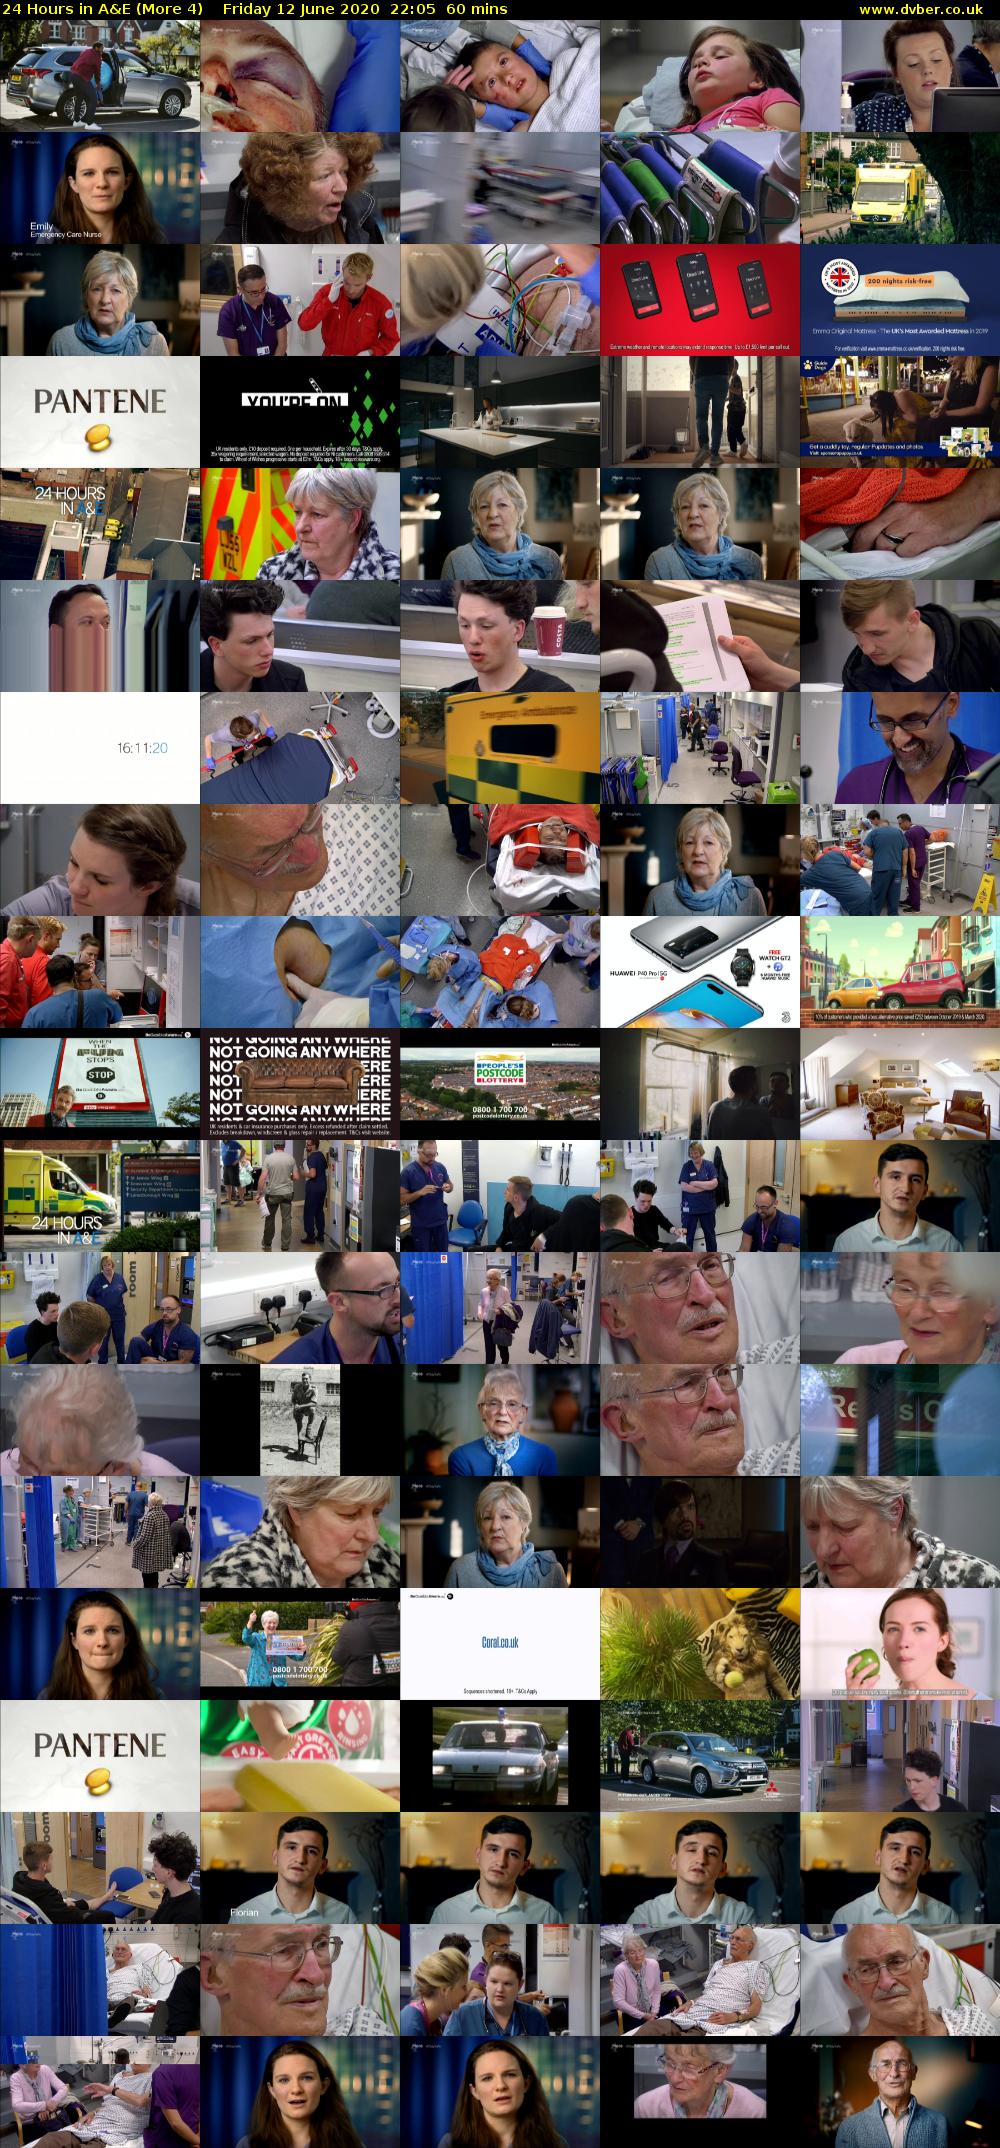 24 Hours in A&E (More 4) Friday 12 June 2020 22:05 - 23:05